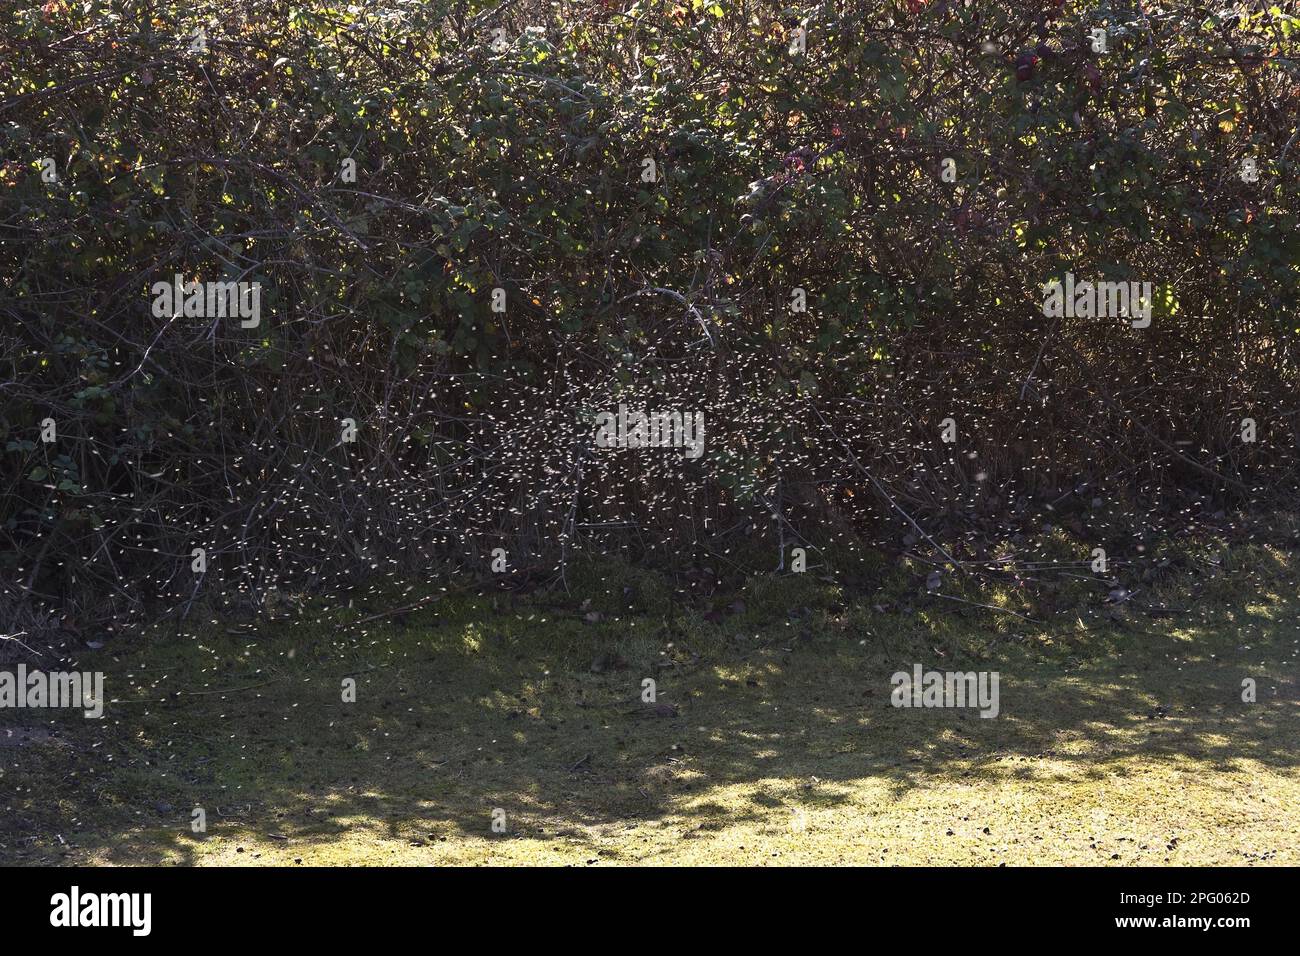 Winter Gnat, Winter Gnats, Other animals, Insects, Animals, Winter Gnat (Trichocera annulata) adults, swarm in flight by autumn hedgerow Stock Photo